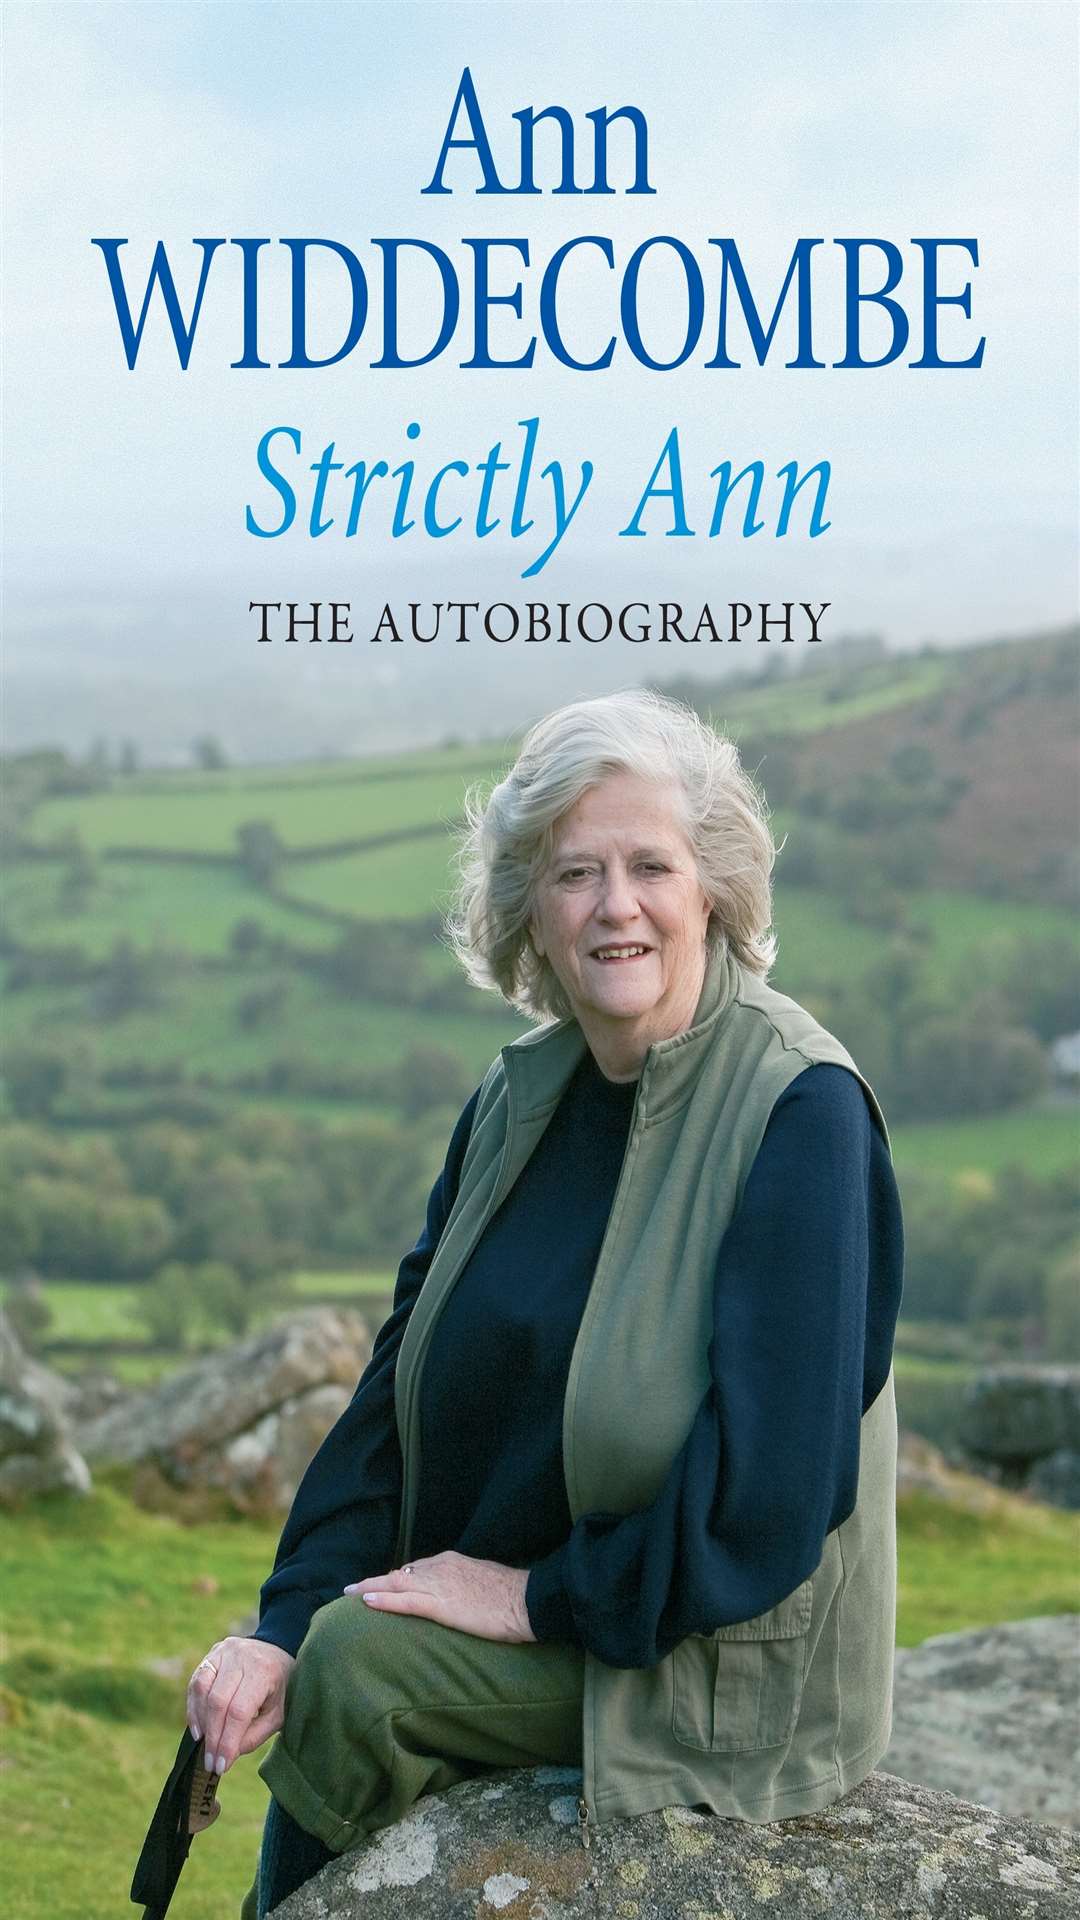 Ann Widdecombe's new autobiography Strictly Ann